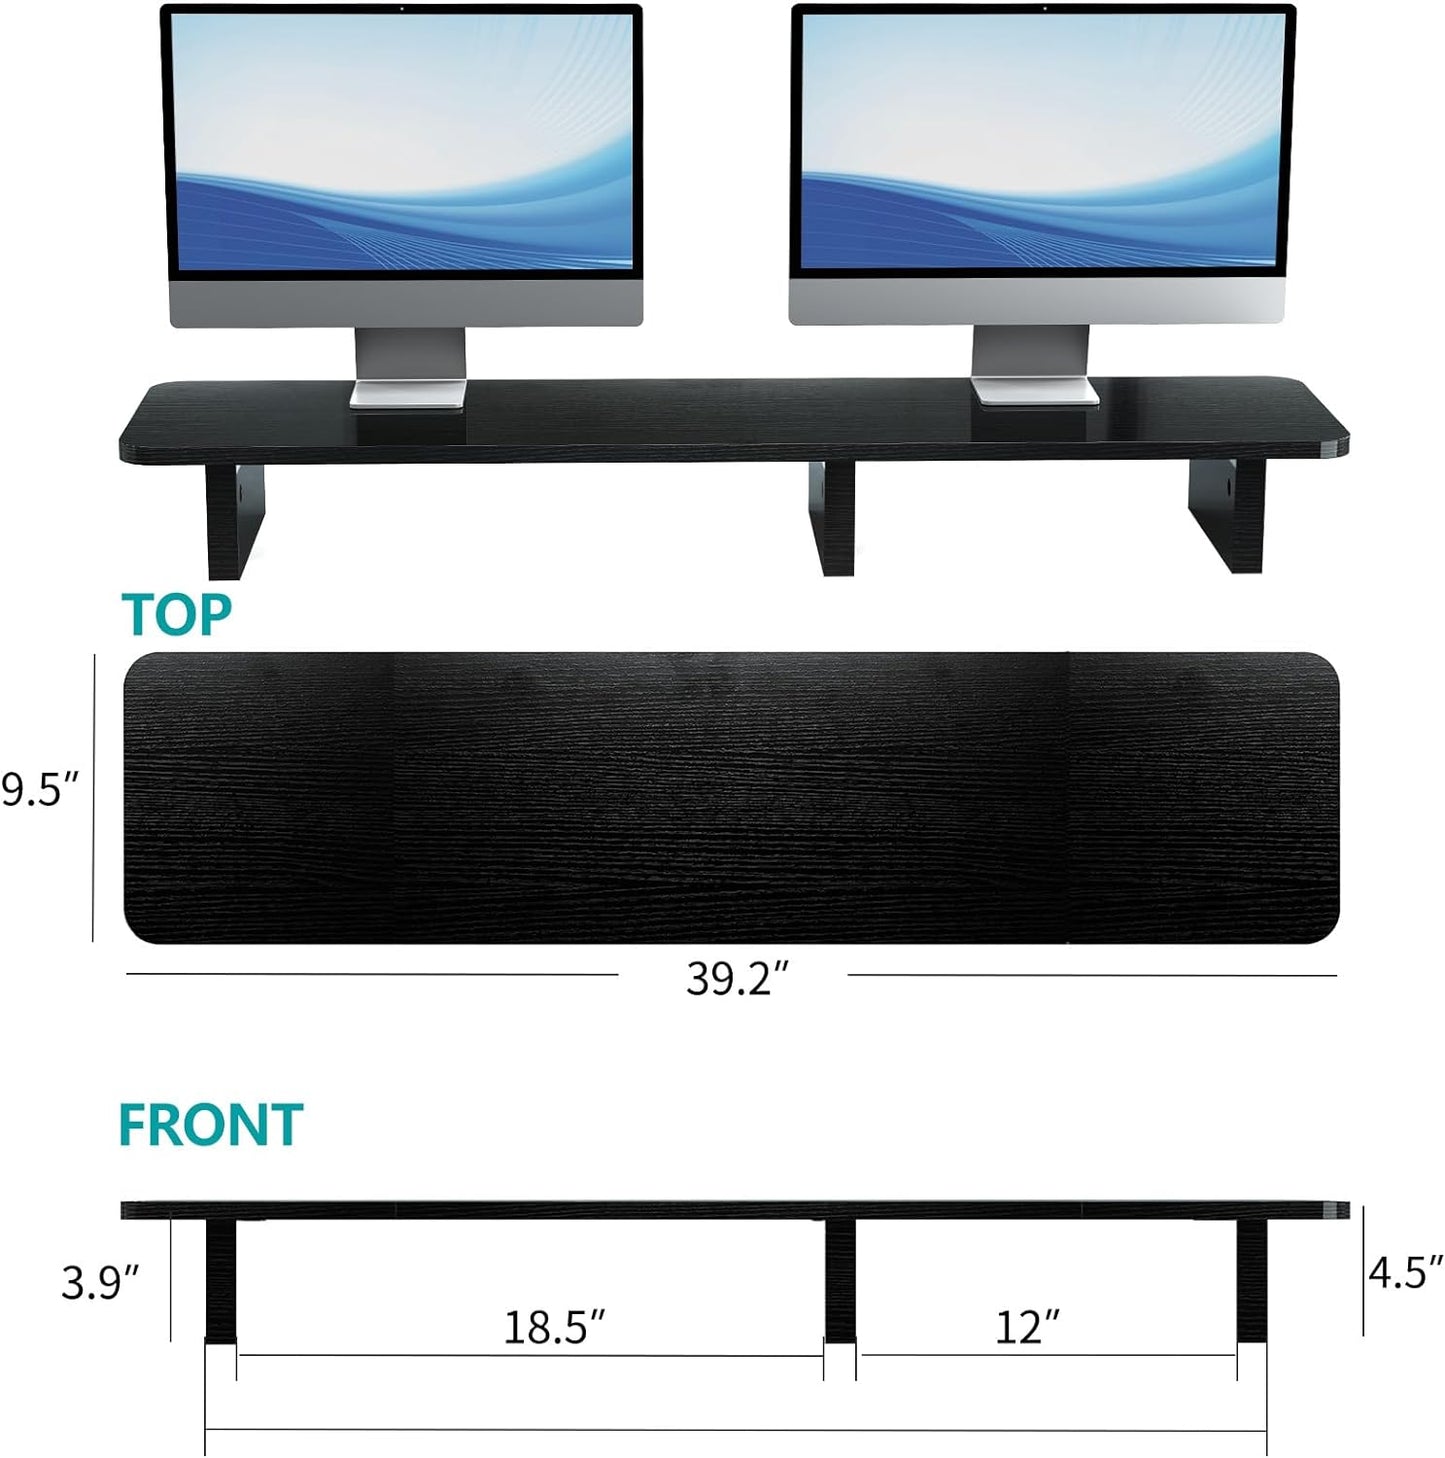 Zimilar Dual Monitor Stand Riser, Large Wood Computer Monitor Riser, Extra Long Monitor Stand for 2 Monitors with Storage for Office Accessories(Black)